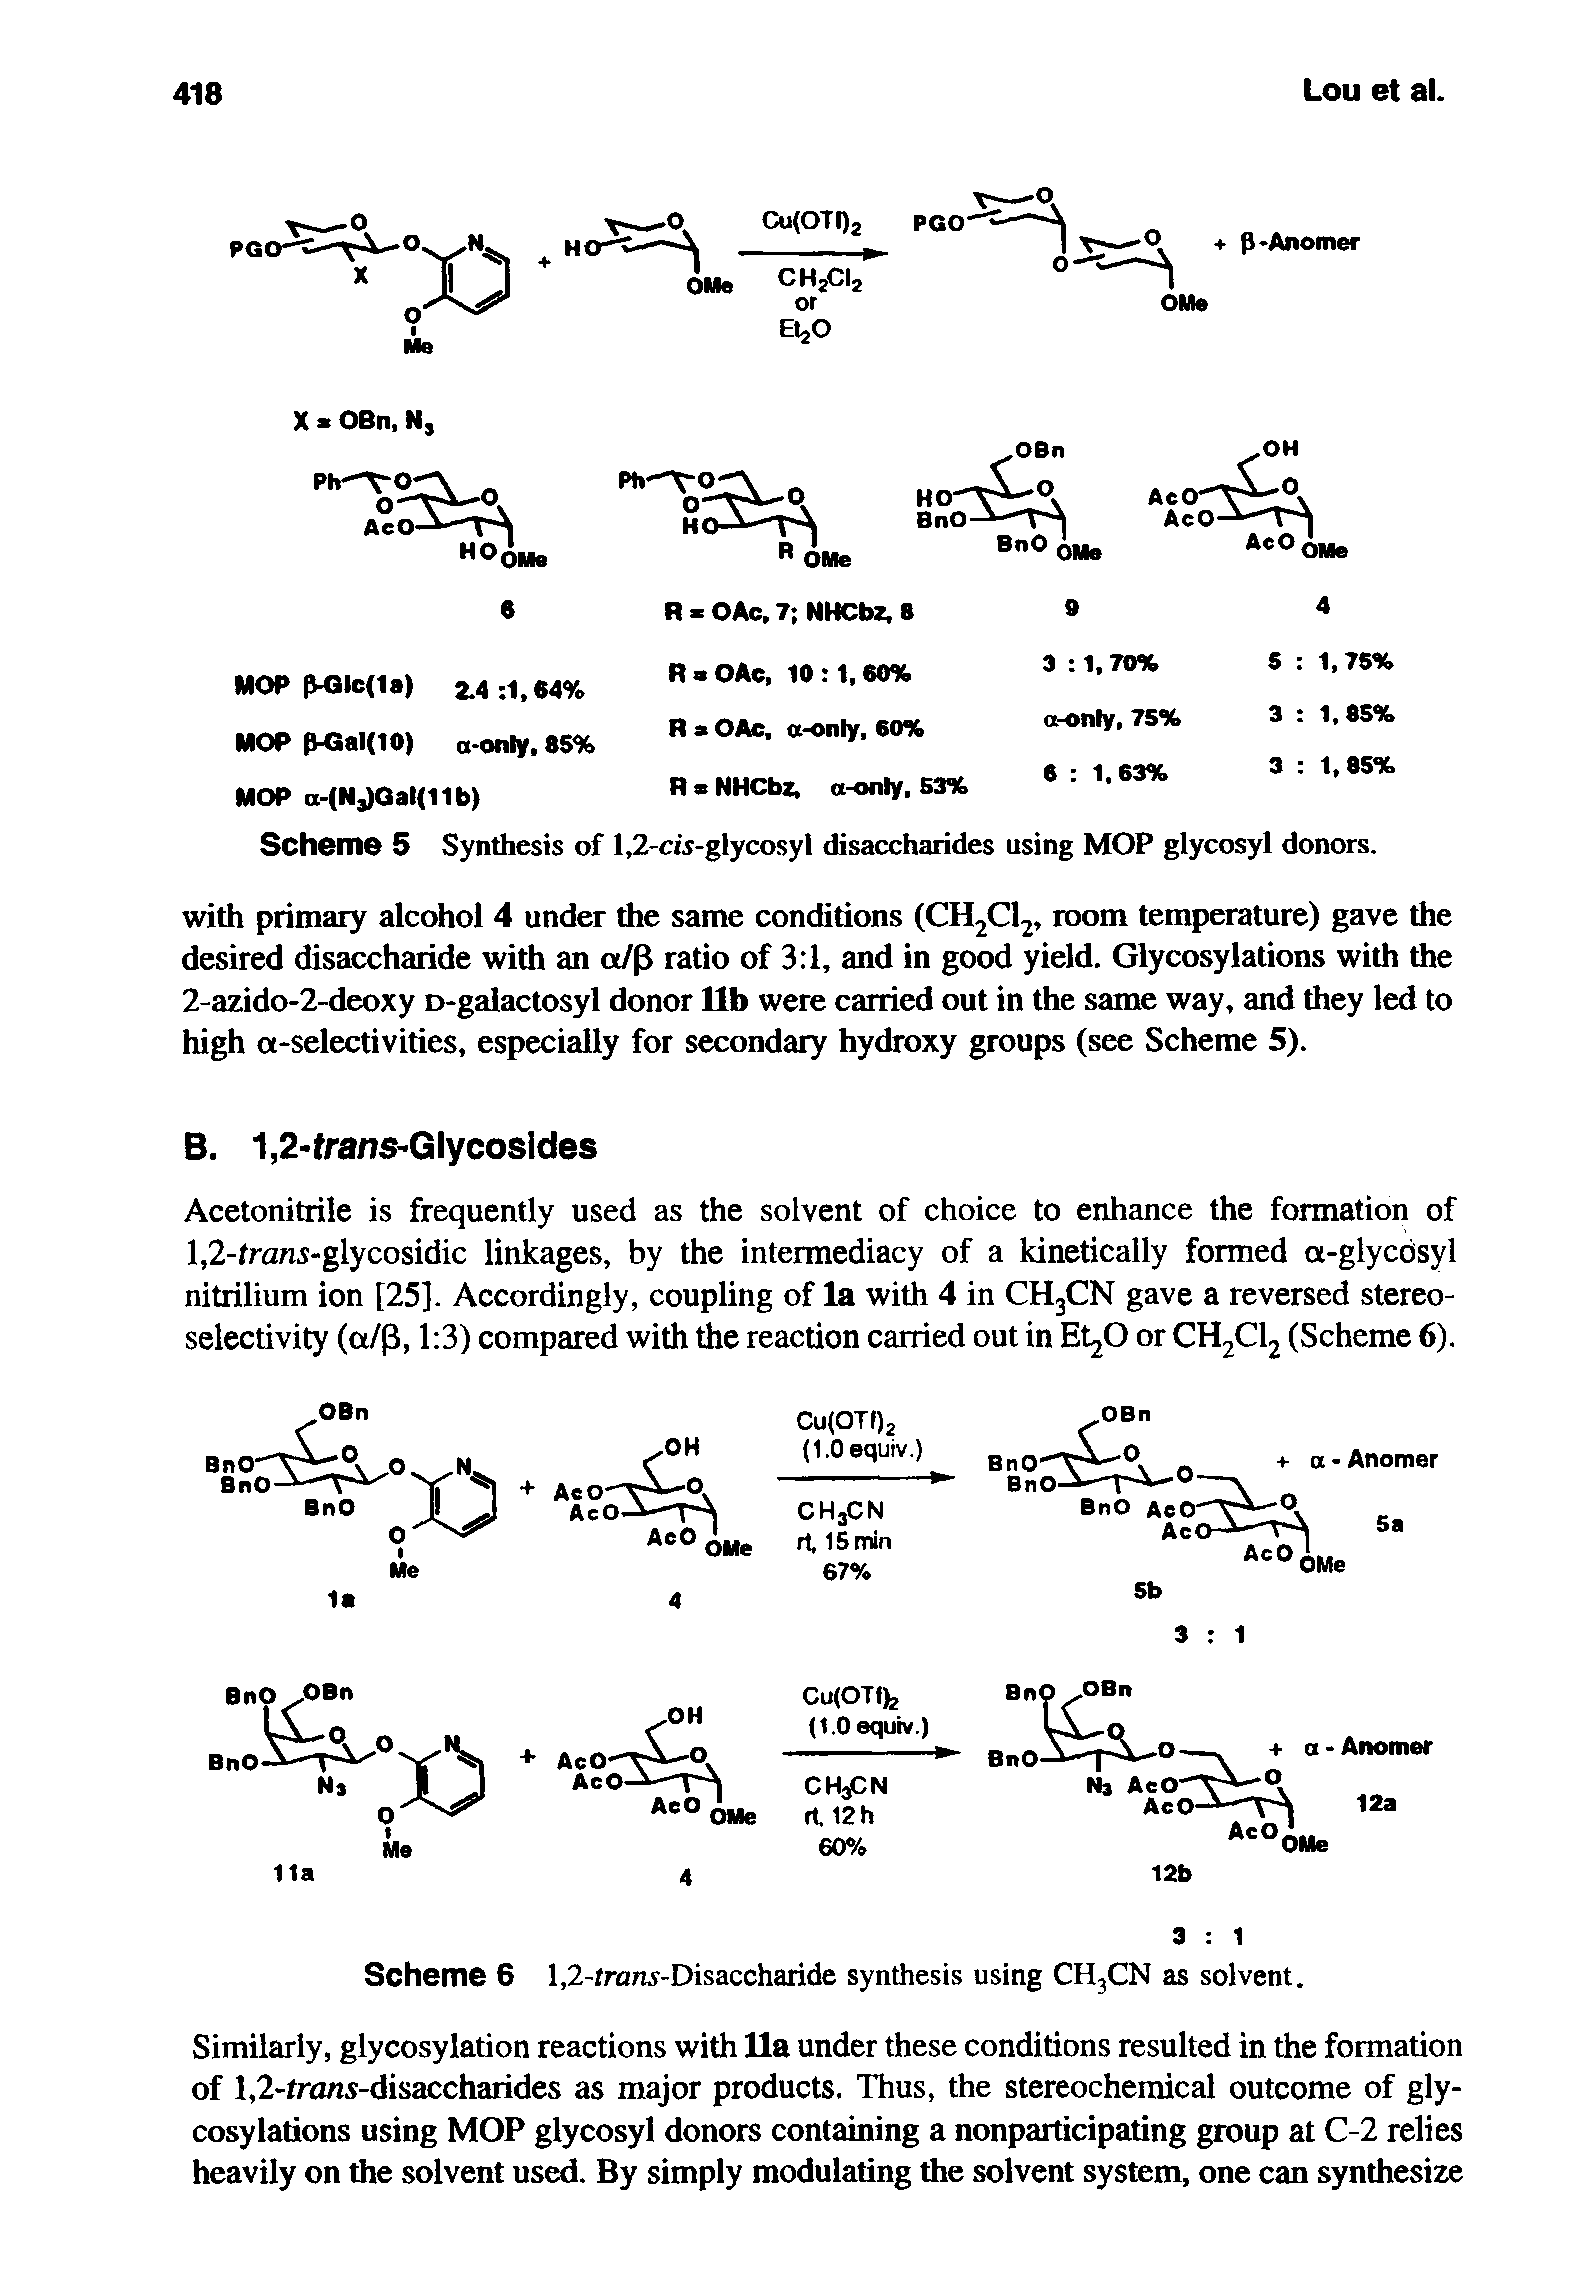 Scheme 5 Synthesis of l,2-c -glycosyl disaccharides using MOP glycosyl donors.